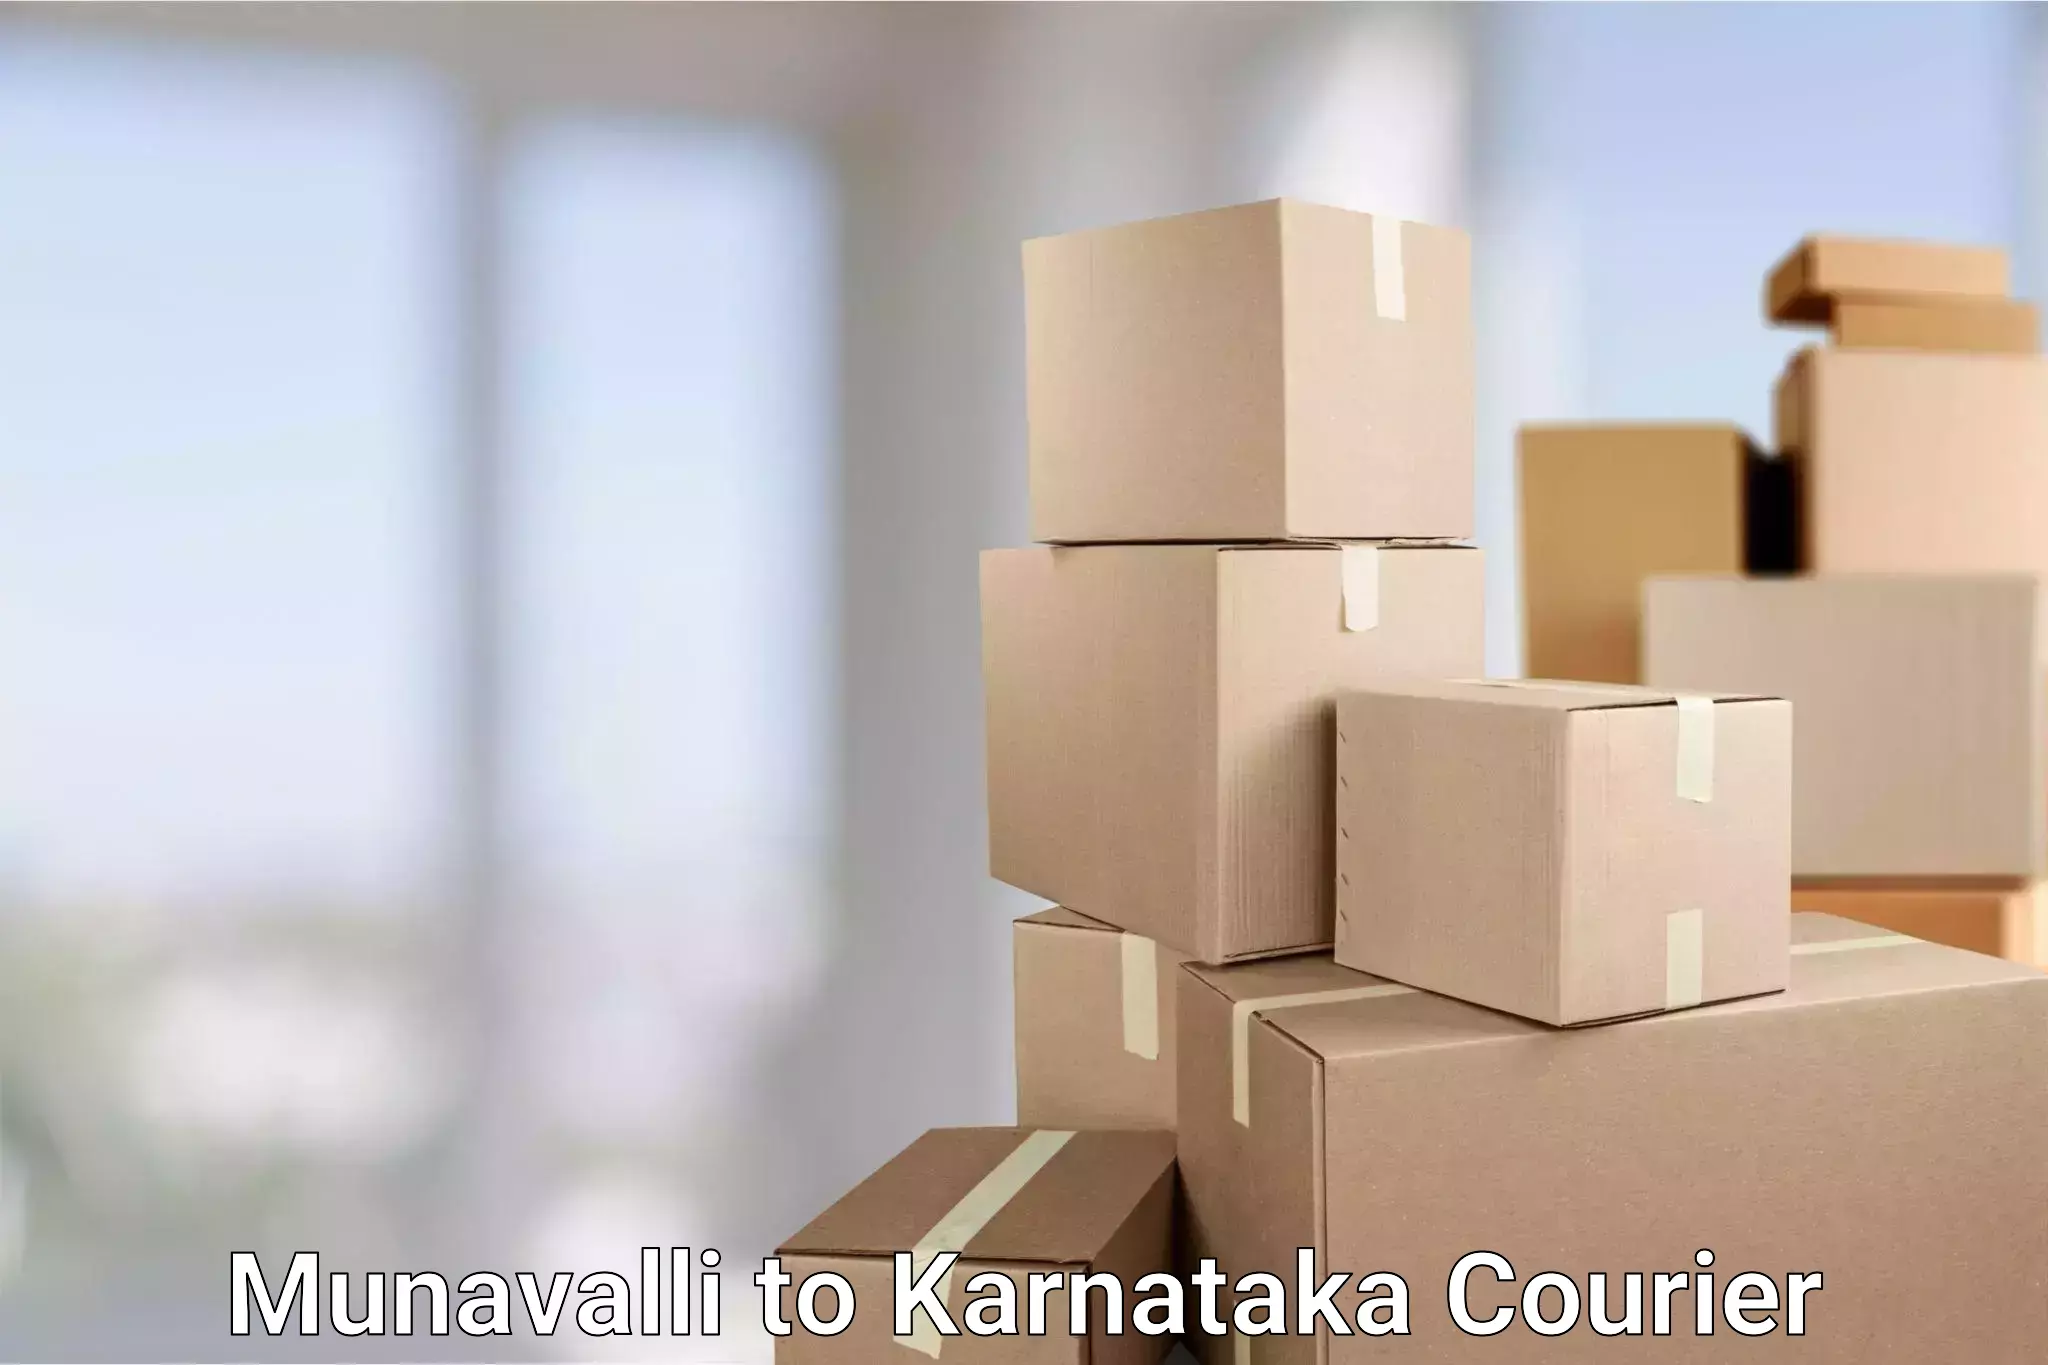 Global shipping solutions in Munavalli to Devanahalli